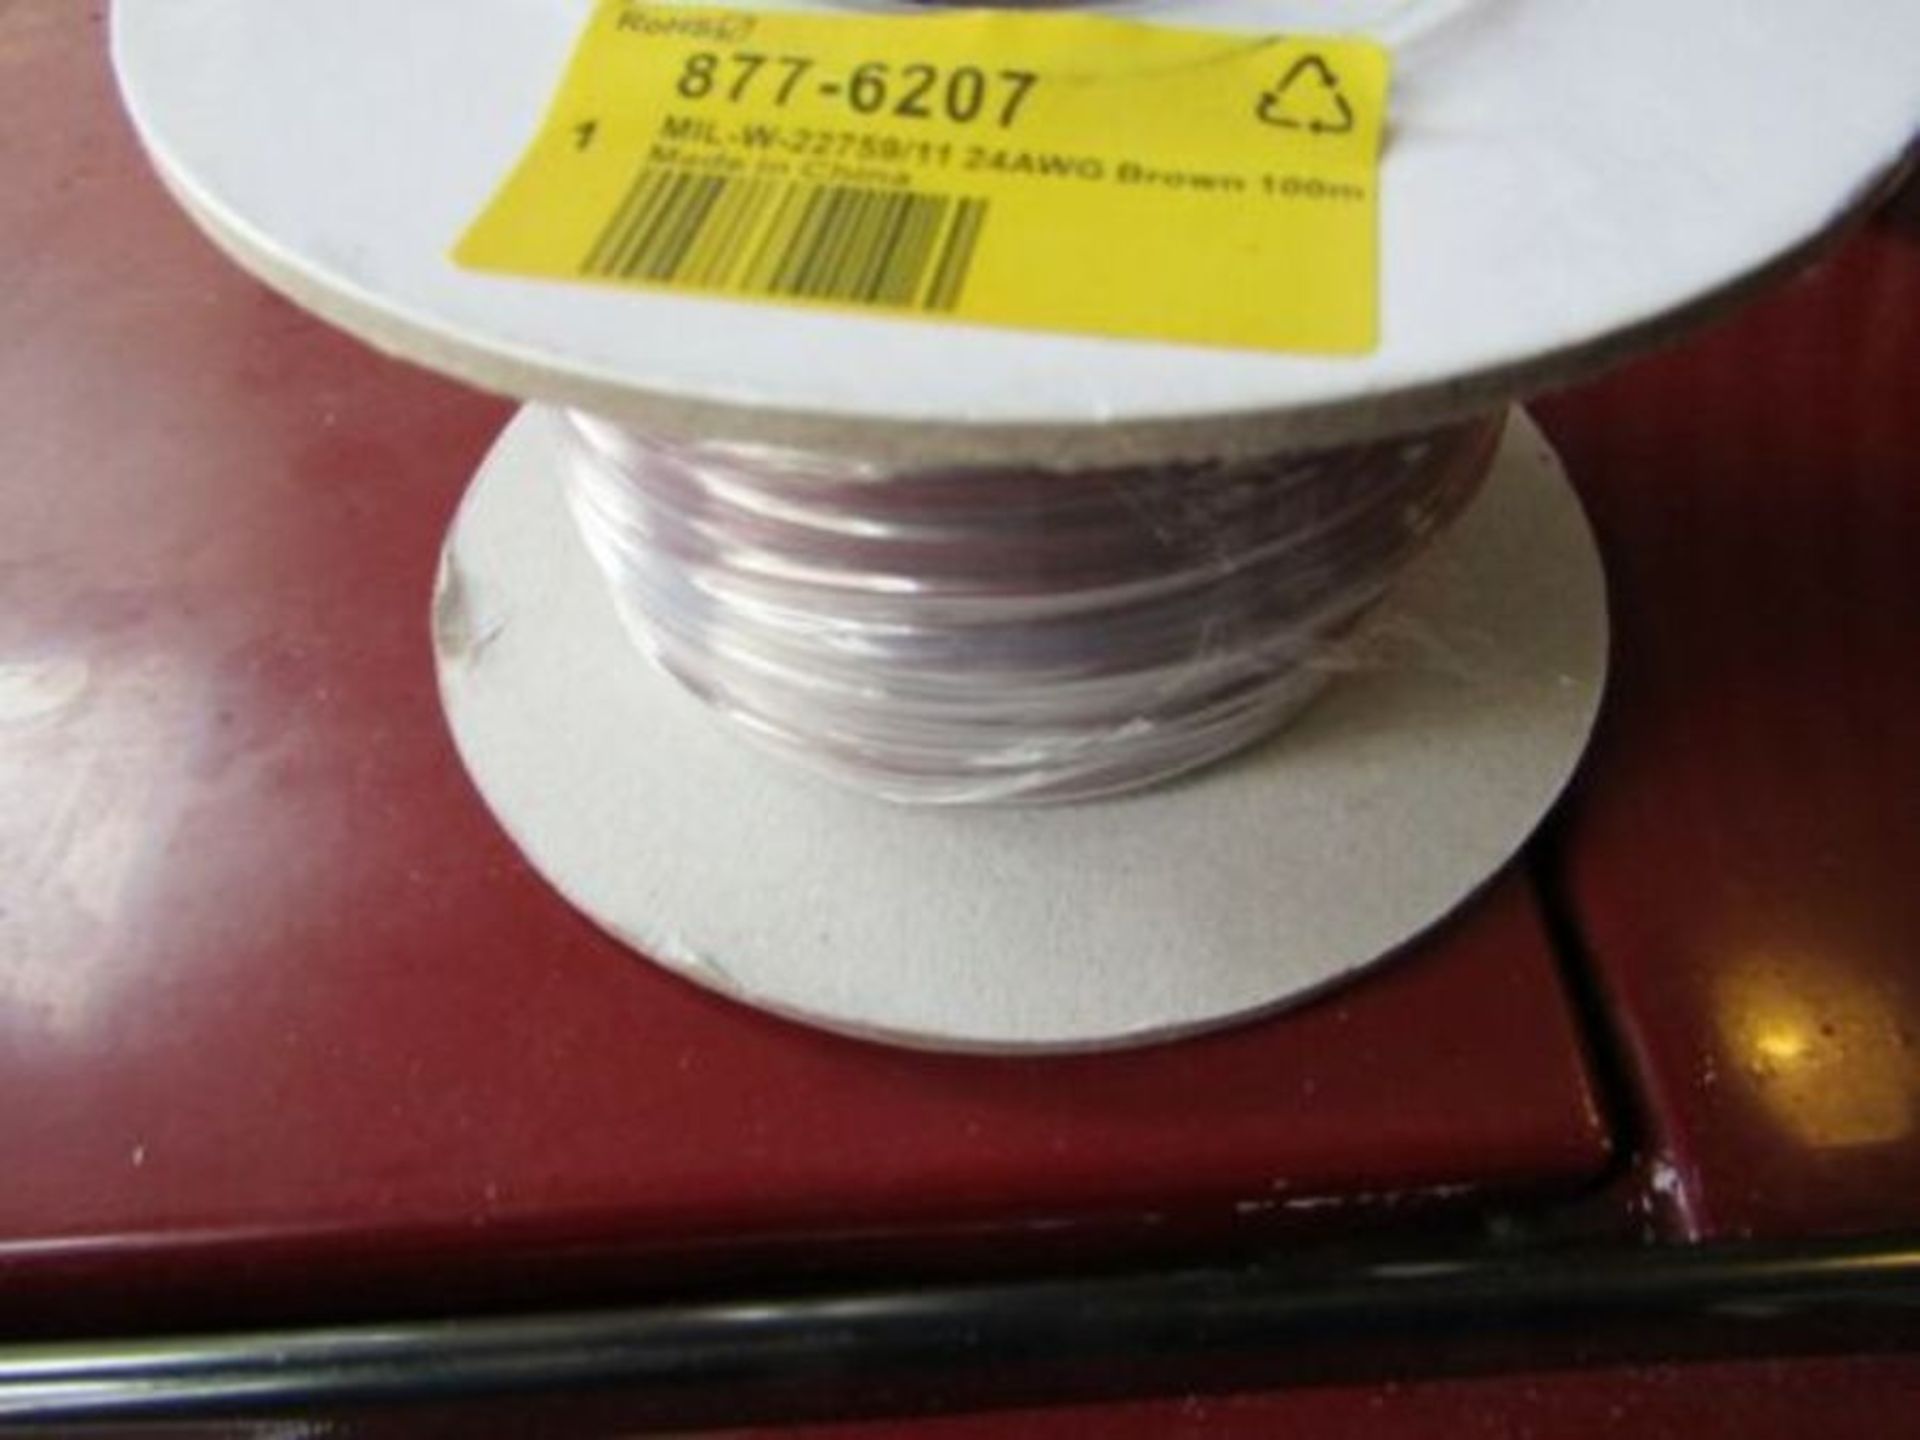 150 x 100m Reels of Assorted Cable / Hook Up Wire - 30 reels each of 5 different items - Image 4 of 6